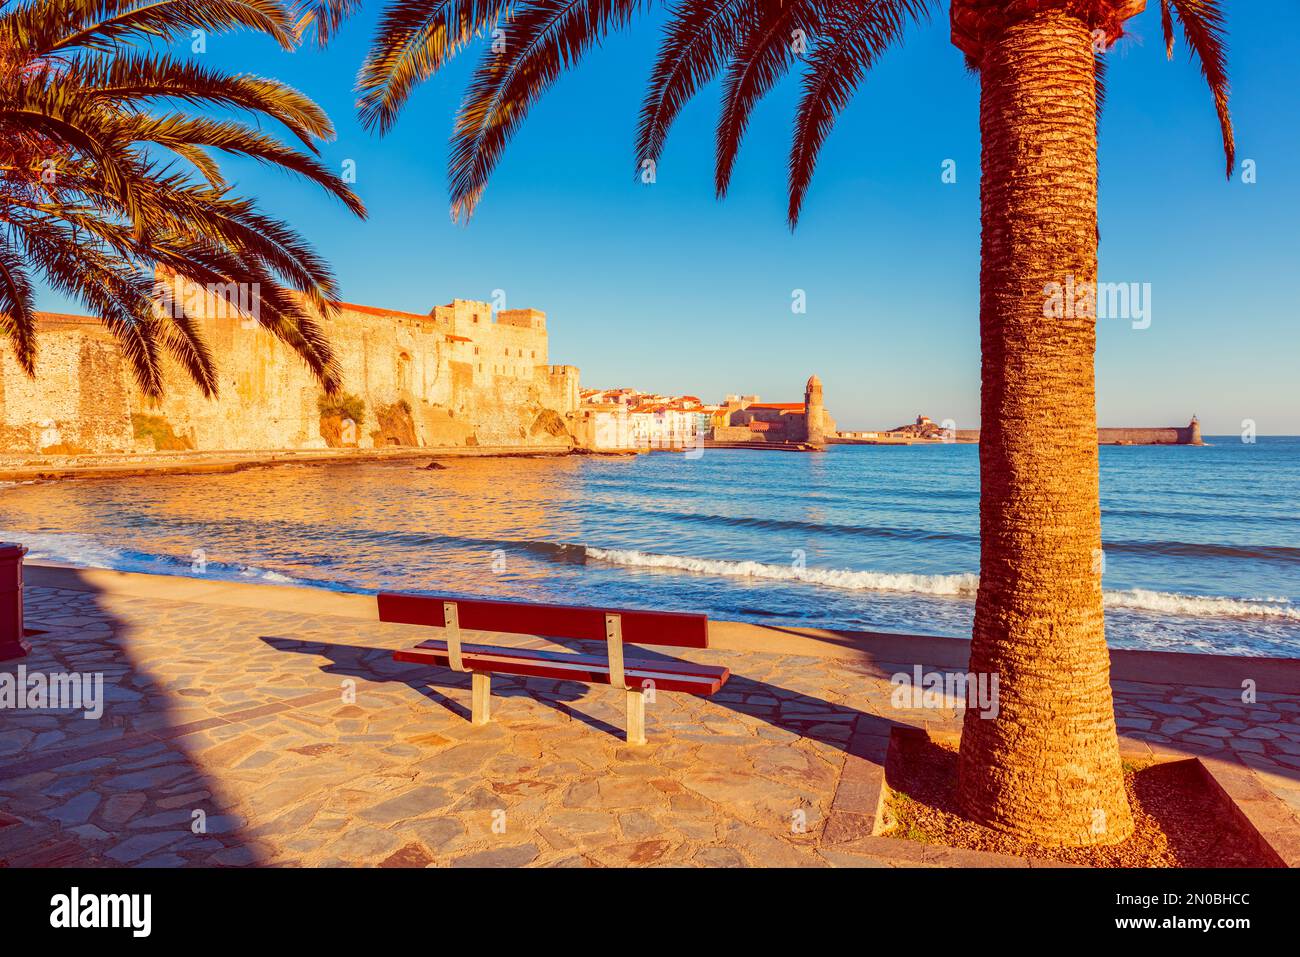 View on Collioure, a coastal village in the southwest of France, near the city of Perpignan and close to the border with Spain. Stock Photo